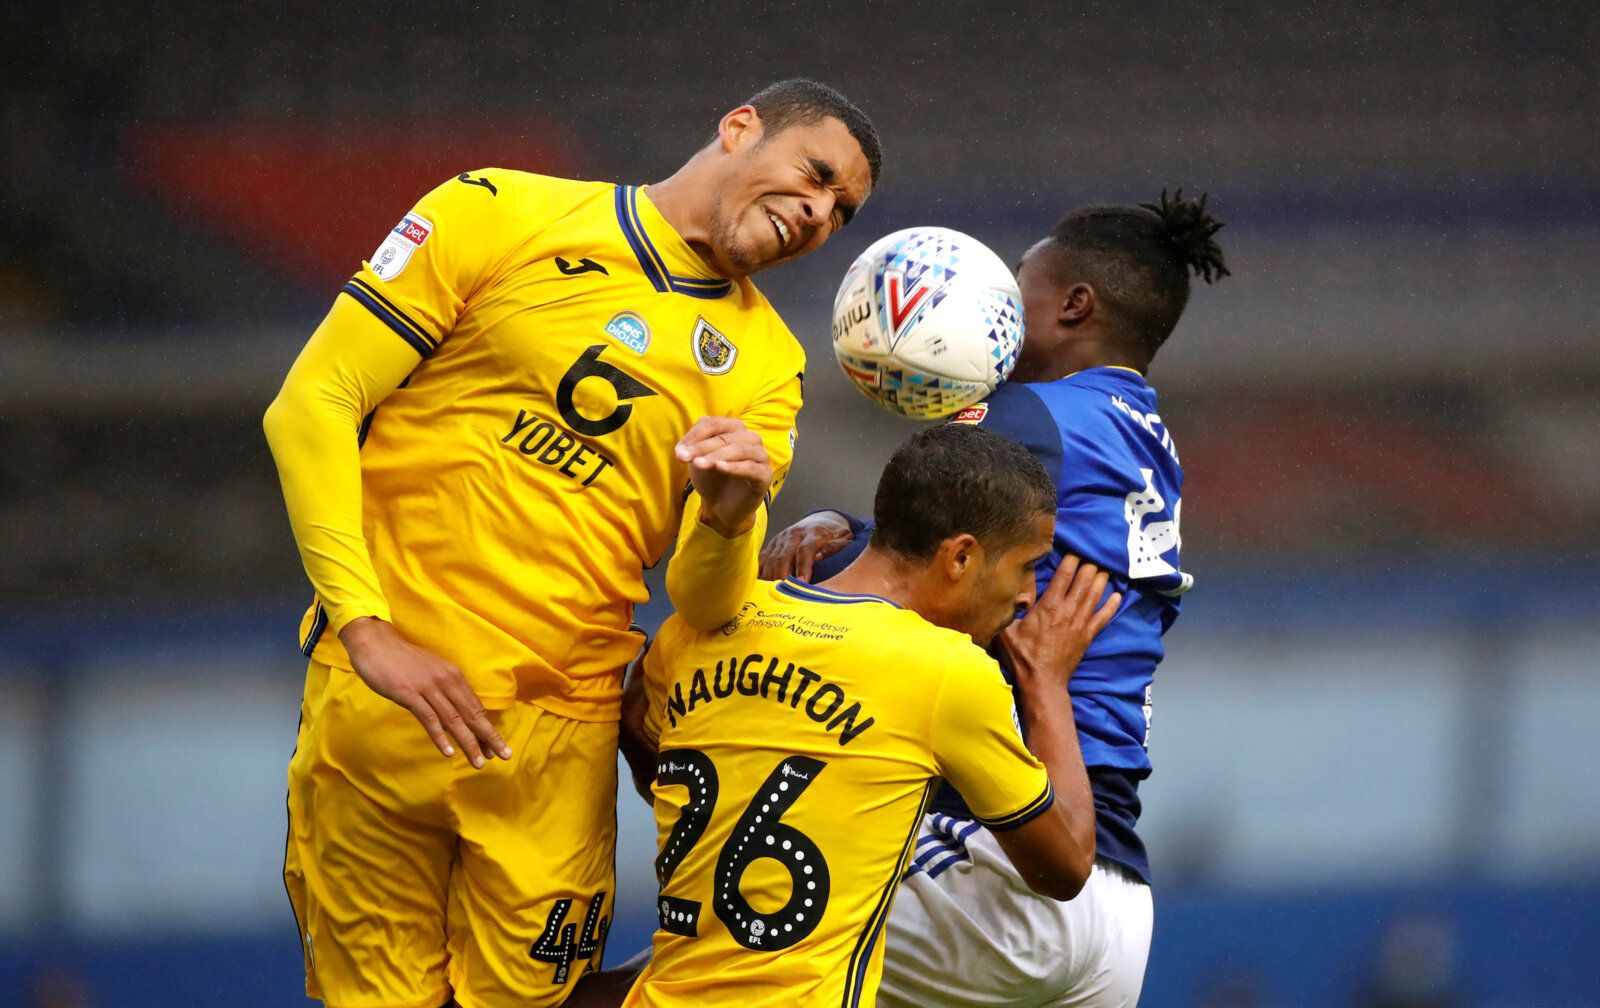 Soccer Football - Championship - Birmingham City v Swansea City - St Andrew's, Birmingham, Britain - July 8, 2020   Swansea City's Ben Cabango and Kyle Naughton in action with Birmingham City's Jayden Reid, as play resumes behind closed doors following the outbreak of the coronavirus disease (COVID-19)   Action Images/Andrew Boyers    EDITORIAL USE ONLY. No use with unauthorized audio, video, data, fixture lists, club/league logos or 